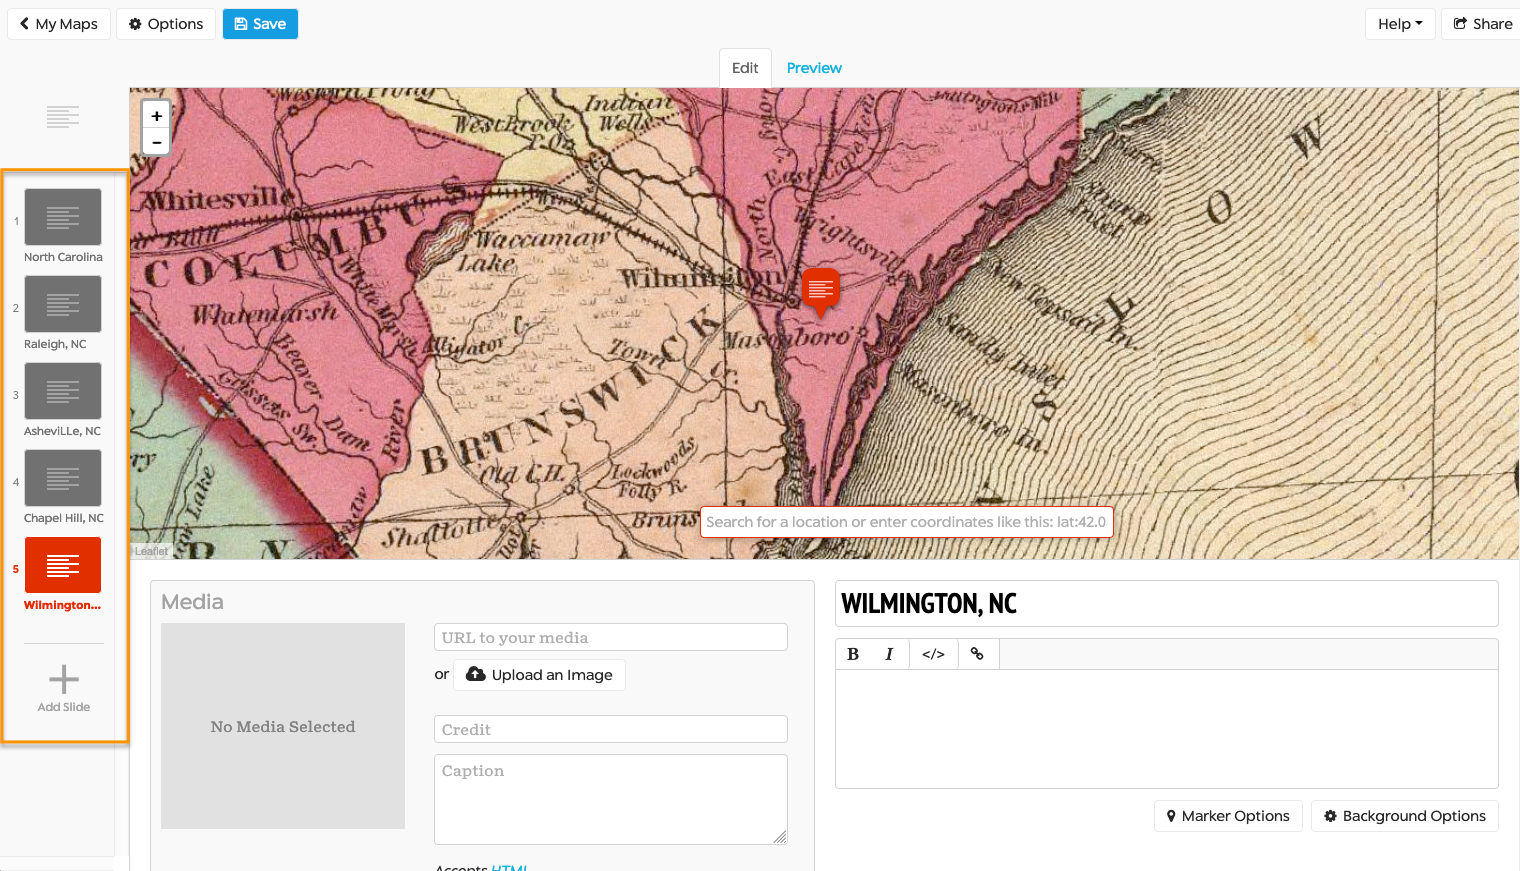 Adding new slides and searching for locations will display zoomed-in areas on your map.